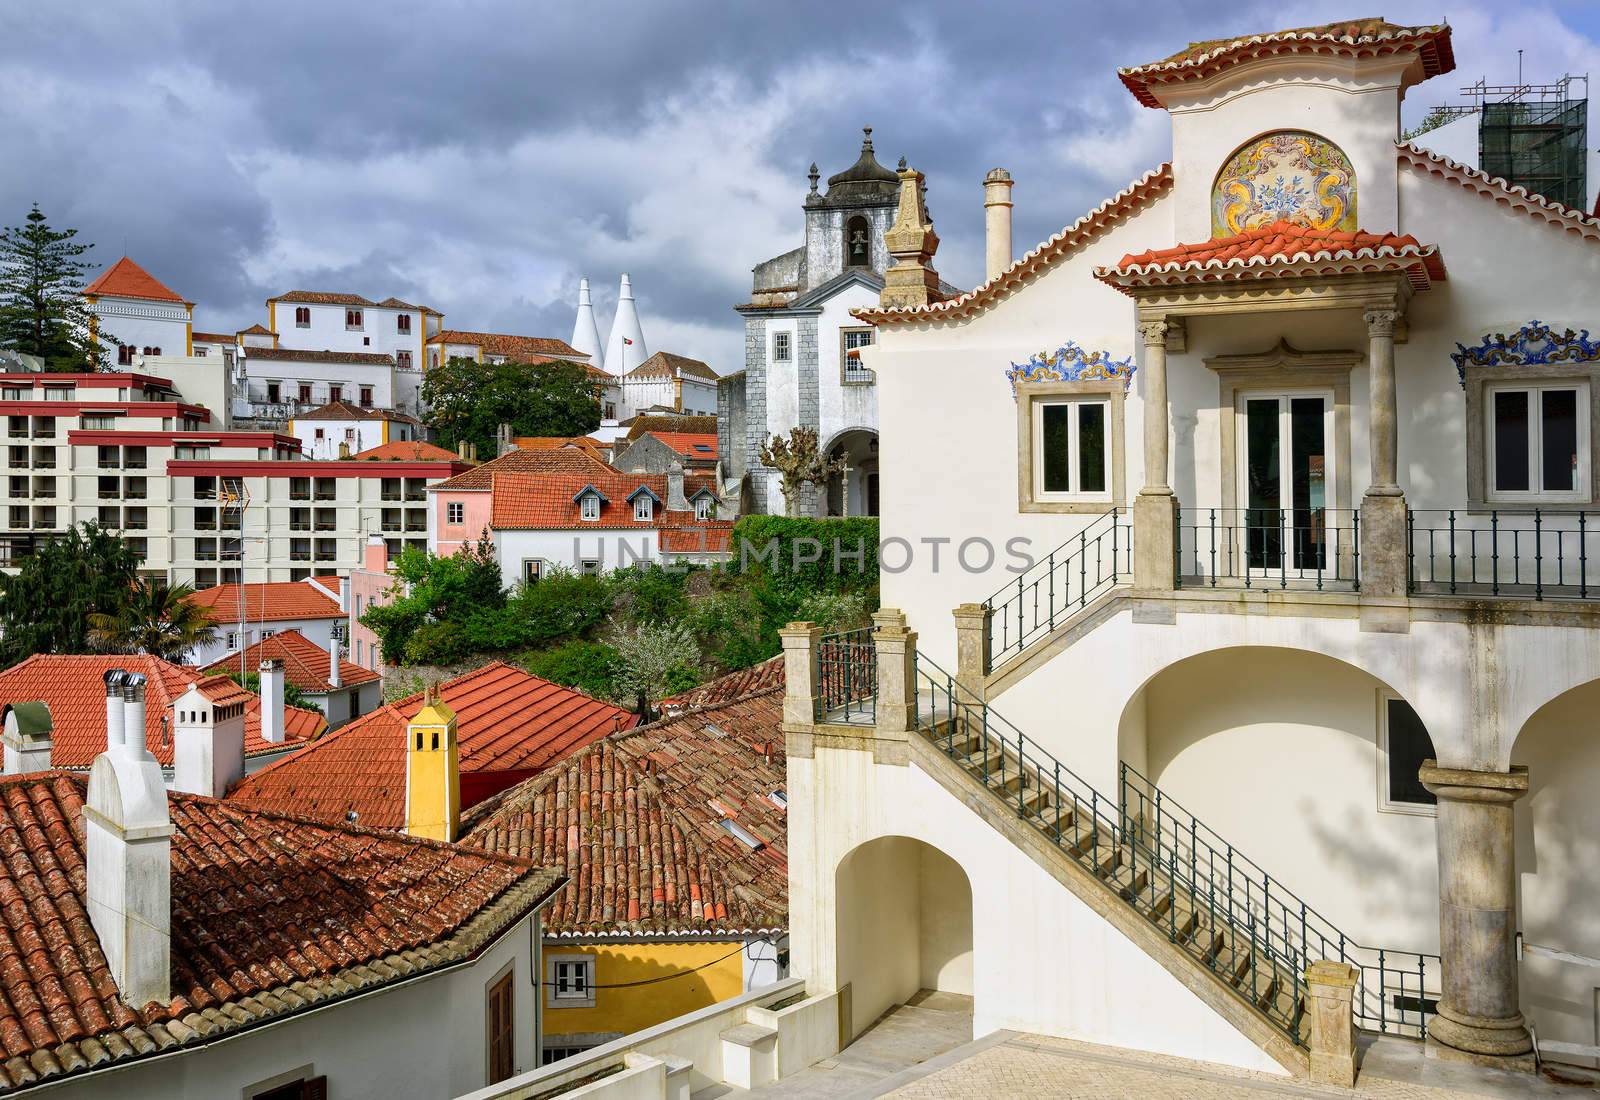 Sintra town, Portugal, the National Palace in background